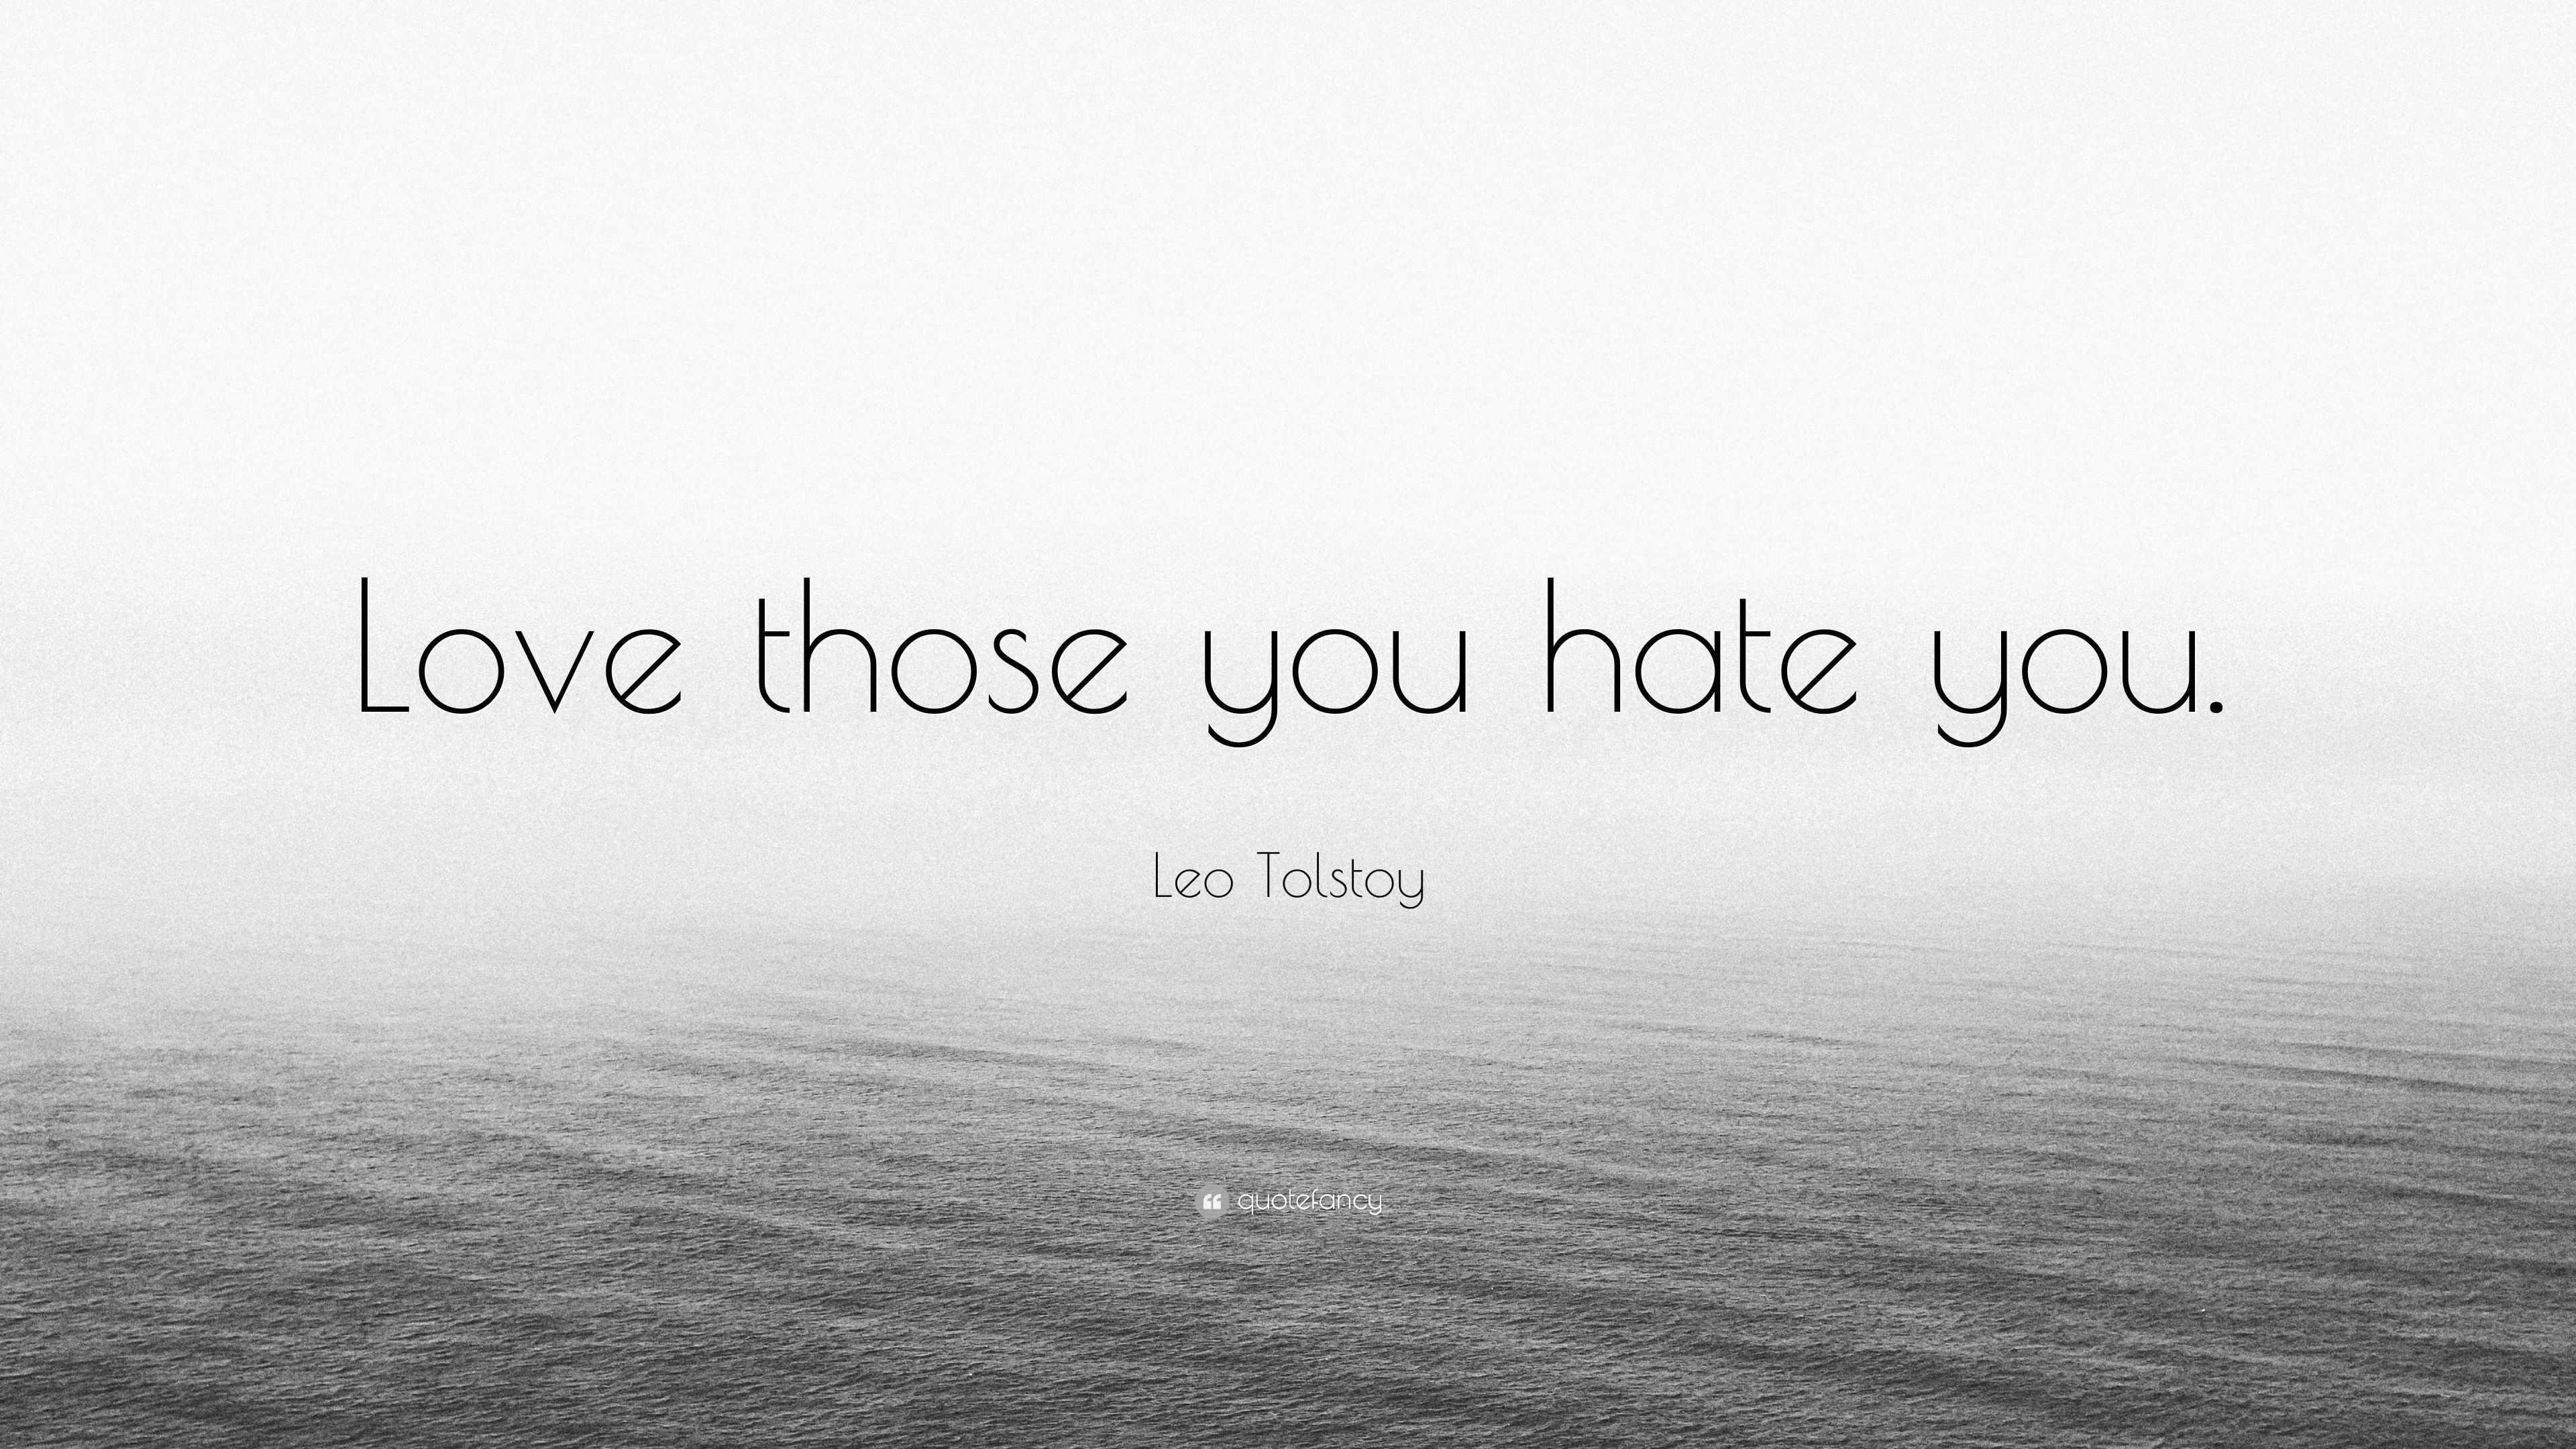 Leo Tolstoy Quote: “Love those you hate you.” 7 wallpaper